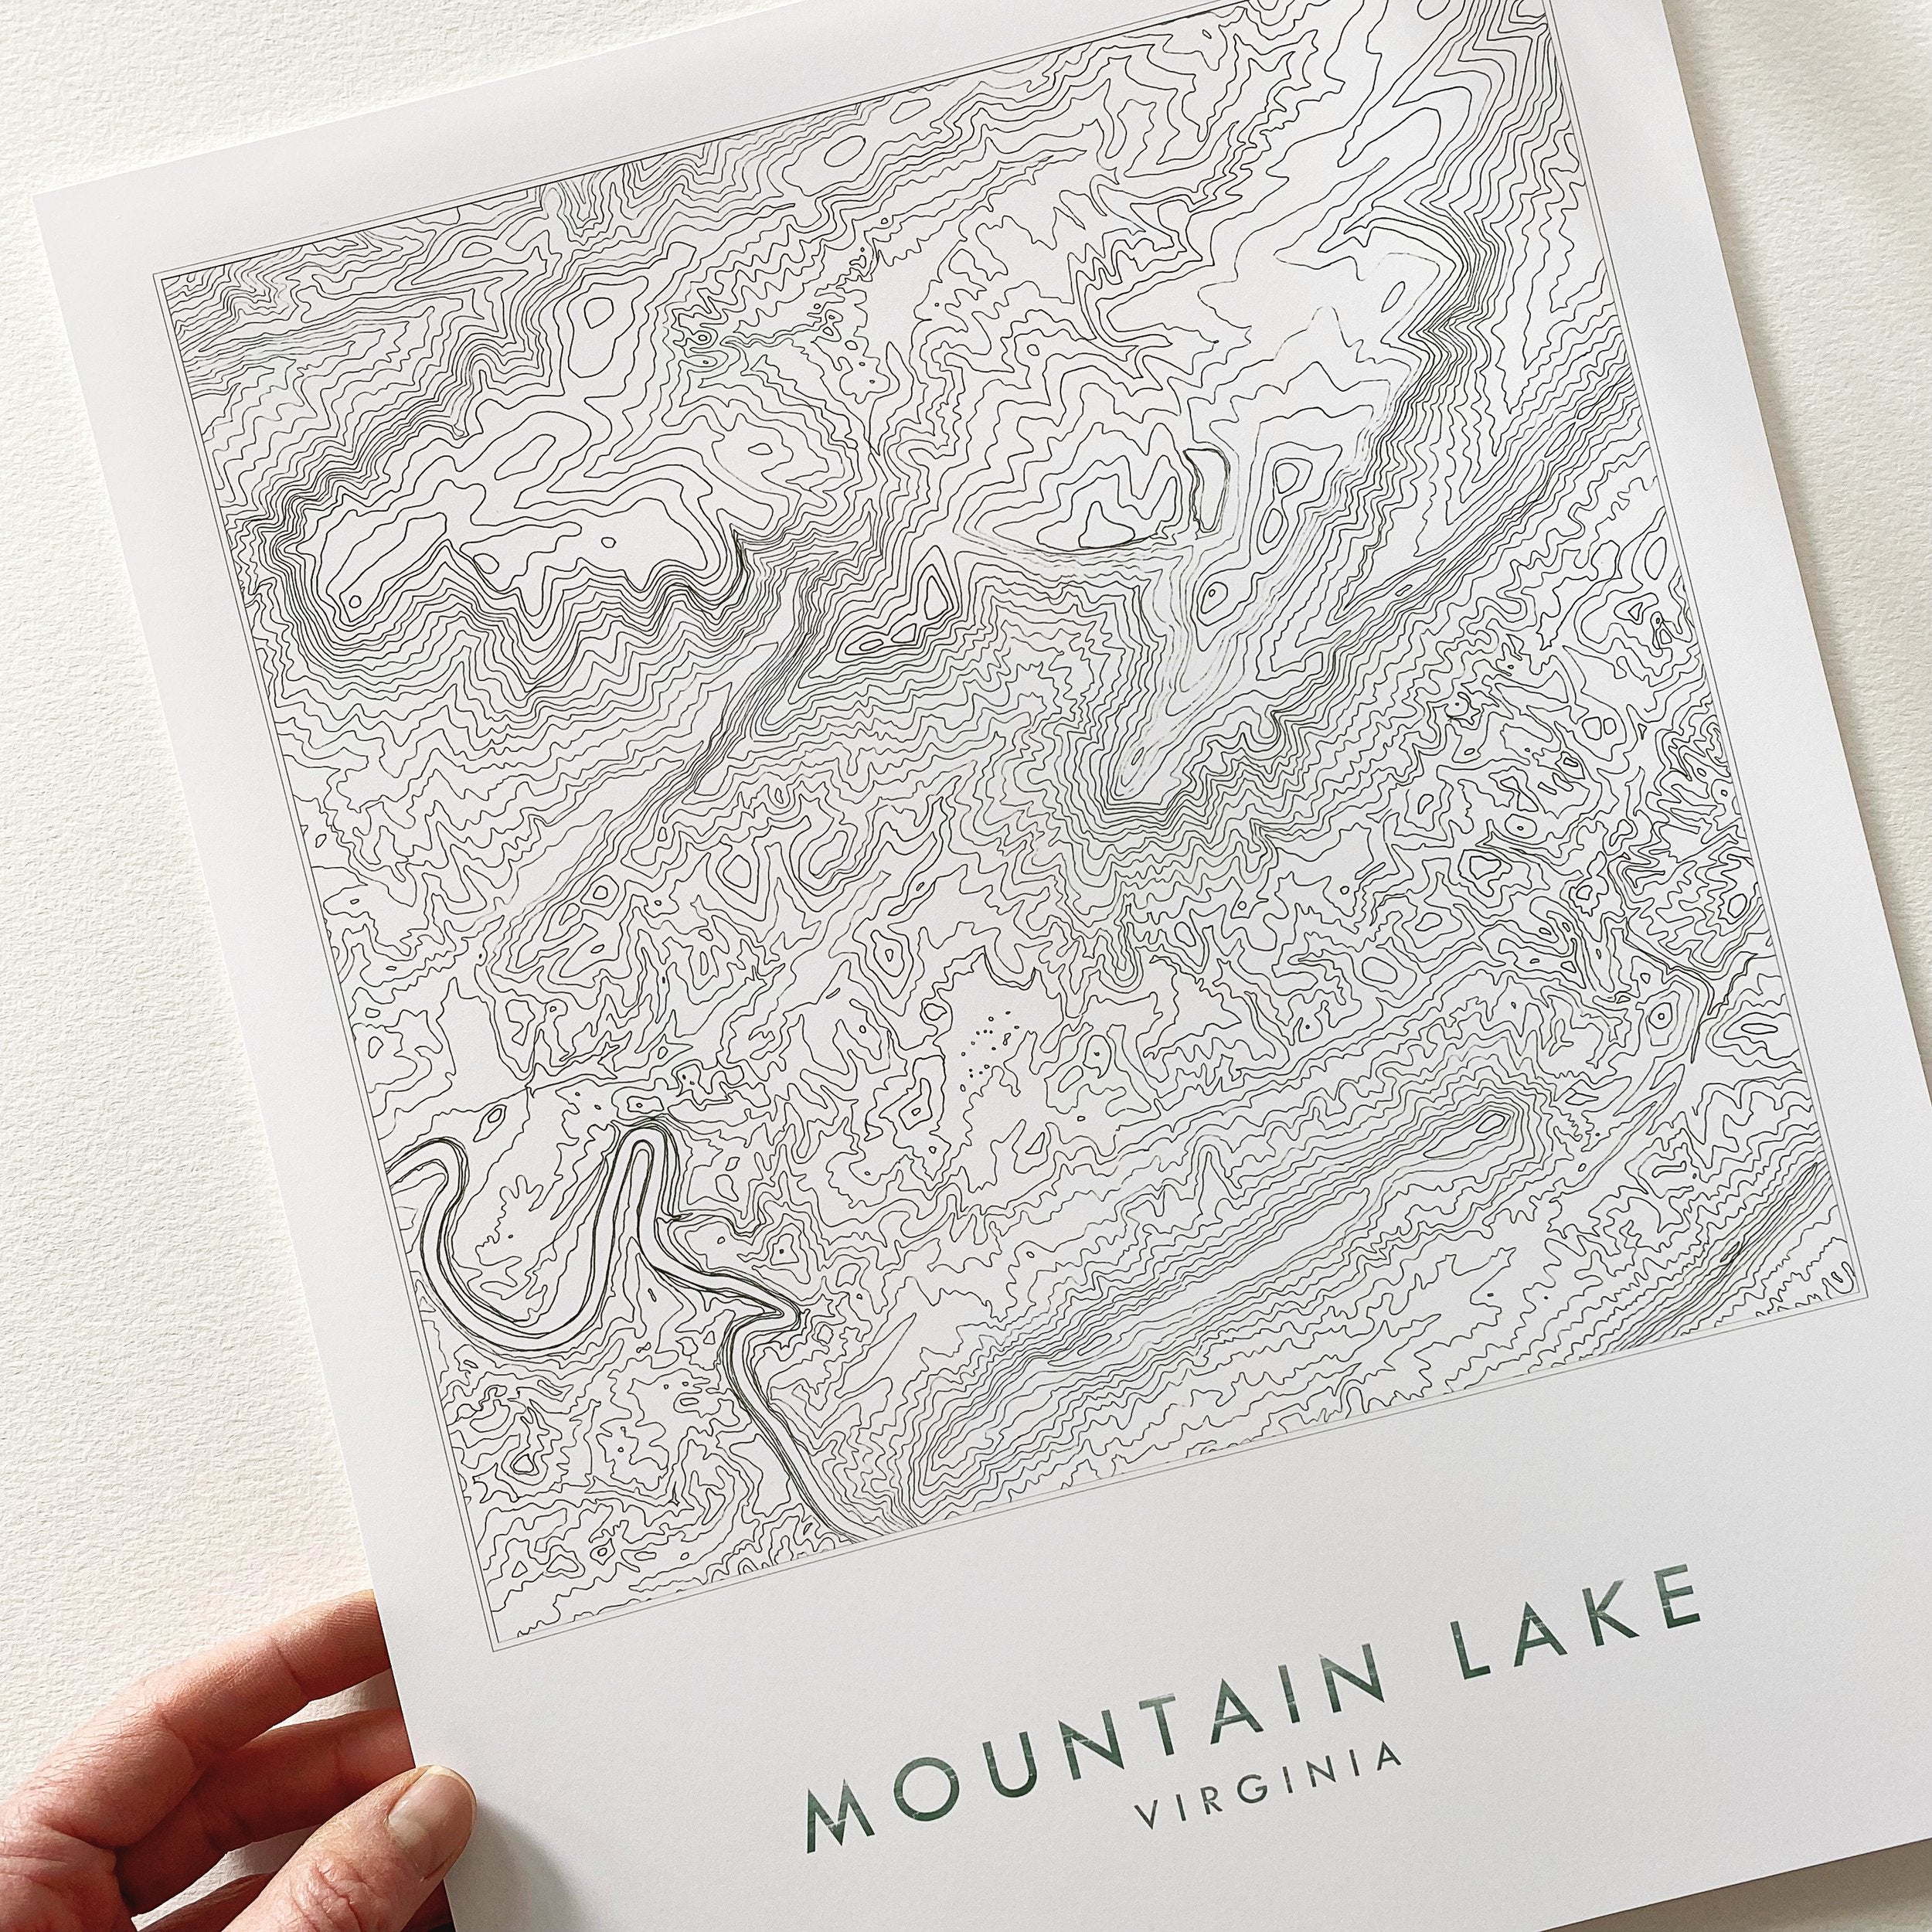 Mountain Lake Southwest VIRGINIA Topographical Map Drawing: PRINT